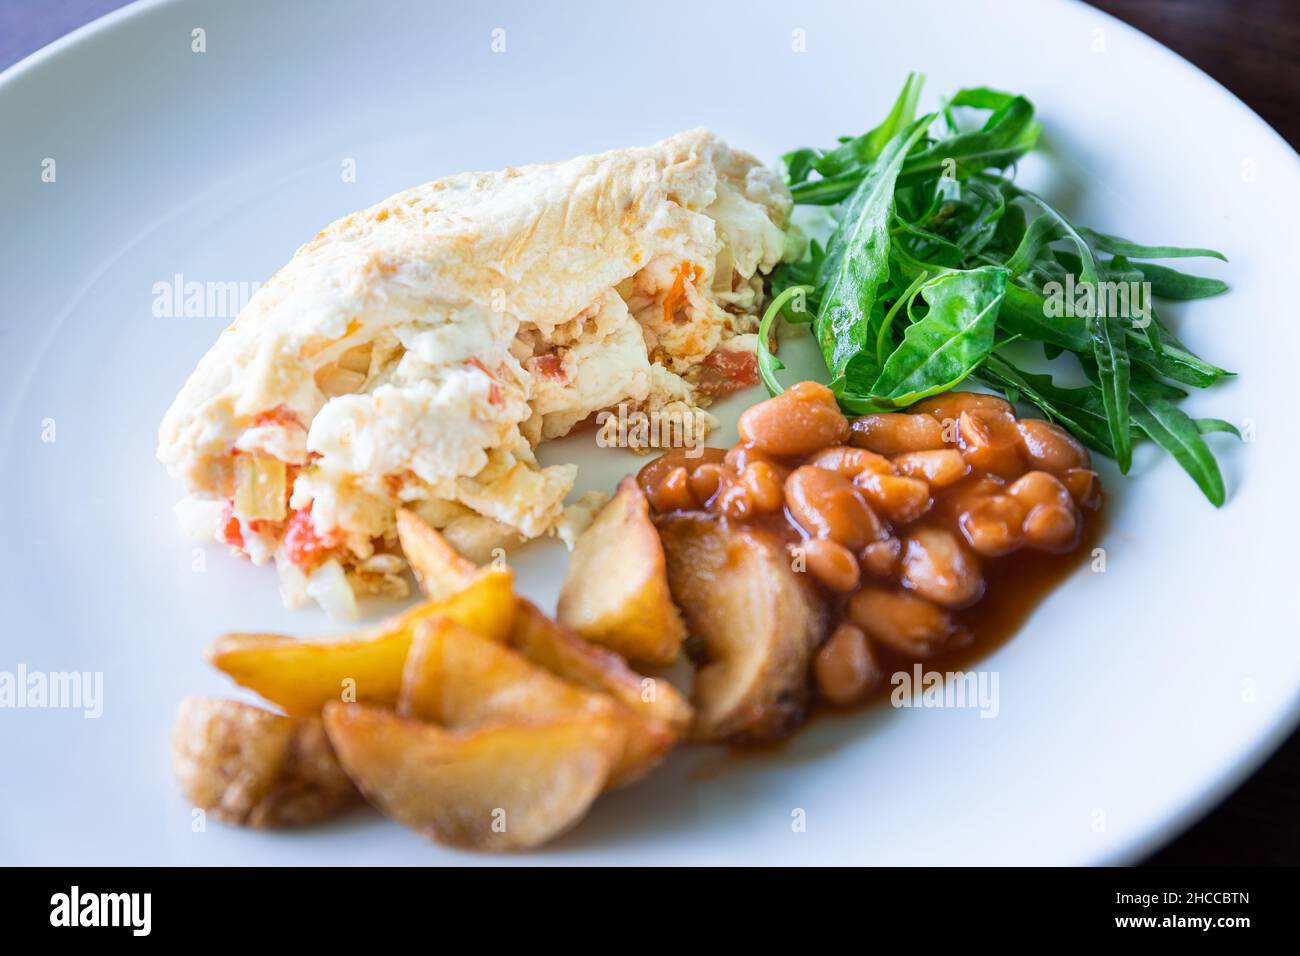 egg white omelette with beans potatoes and salad, healthy breakfast Stock Photo